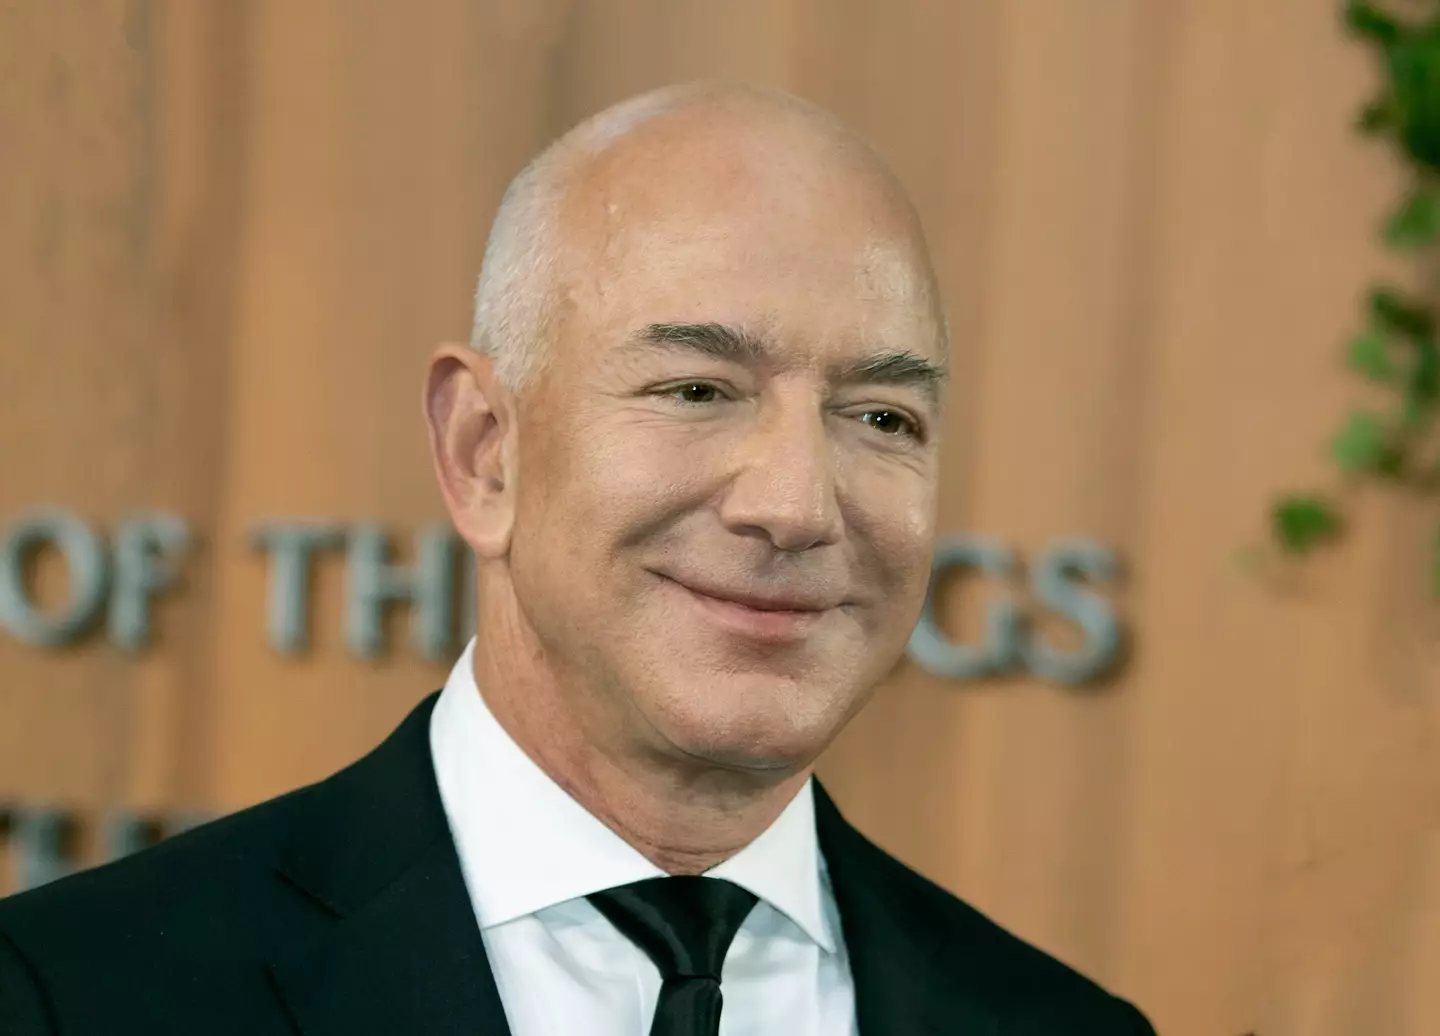 When Amazon lost the money, Bezos dropped to the fourth richest person in the world.